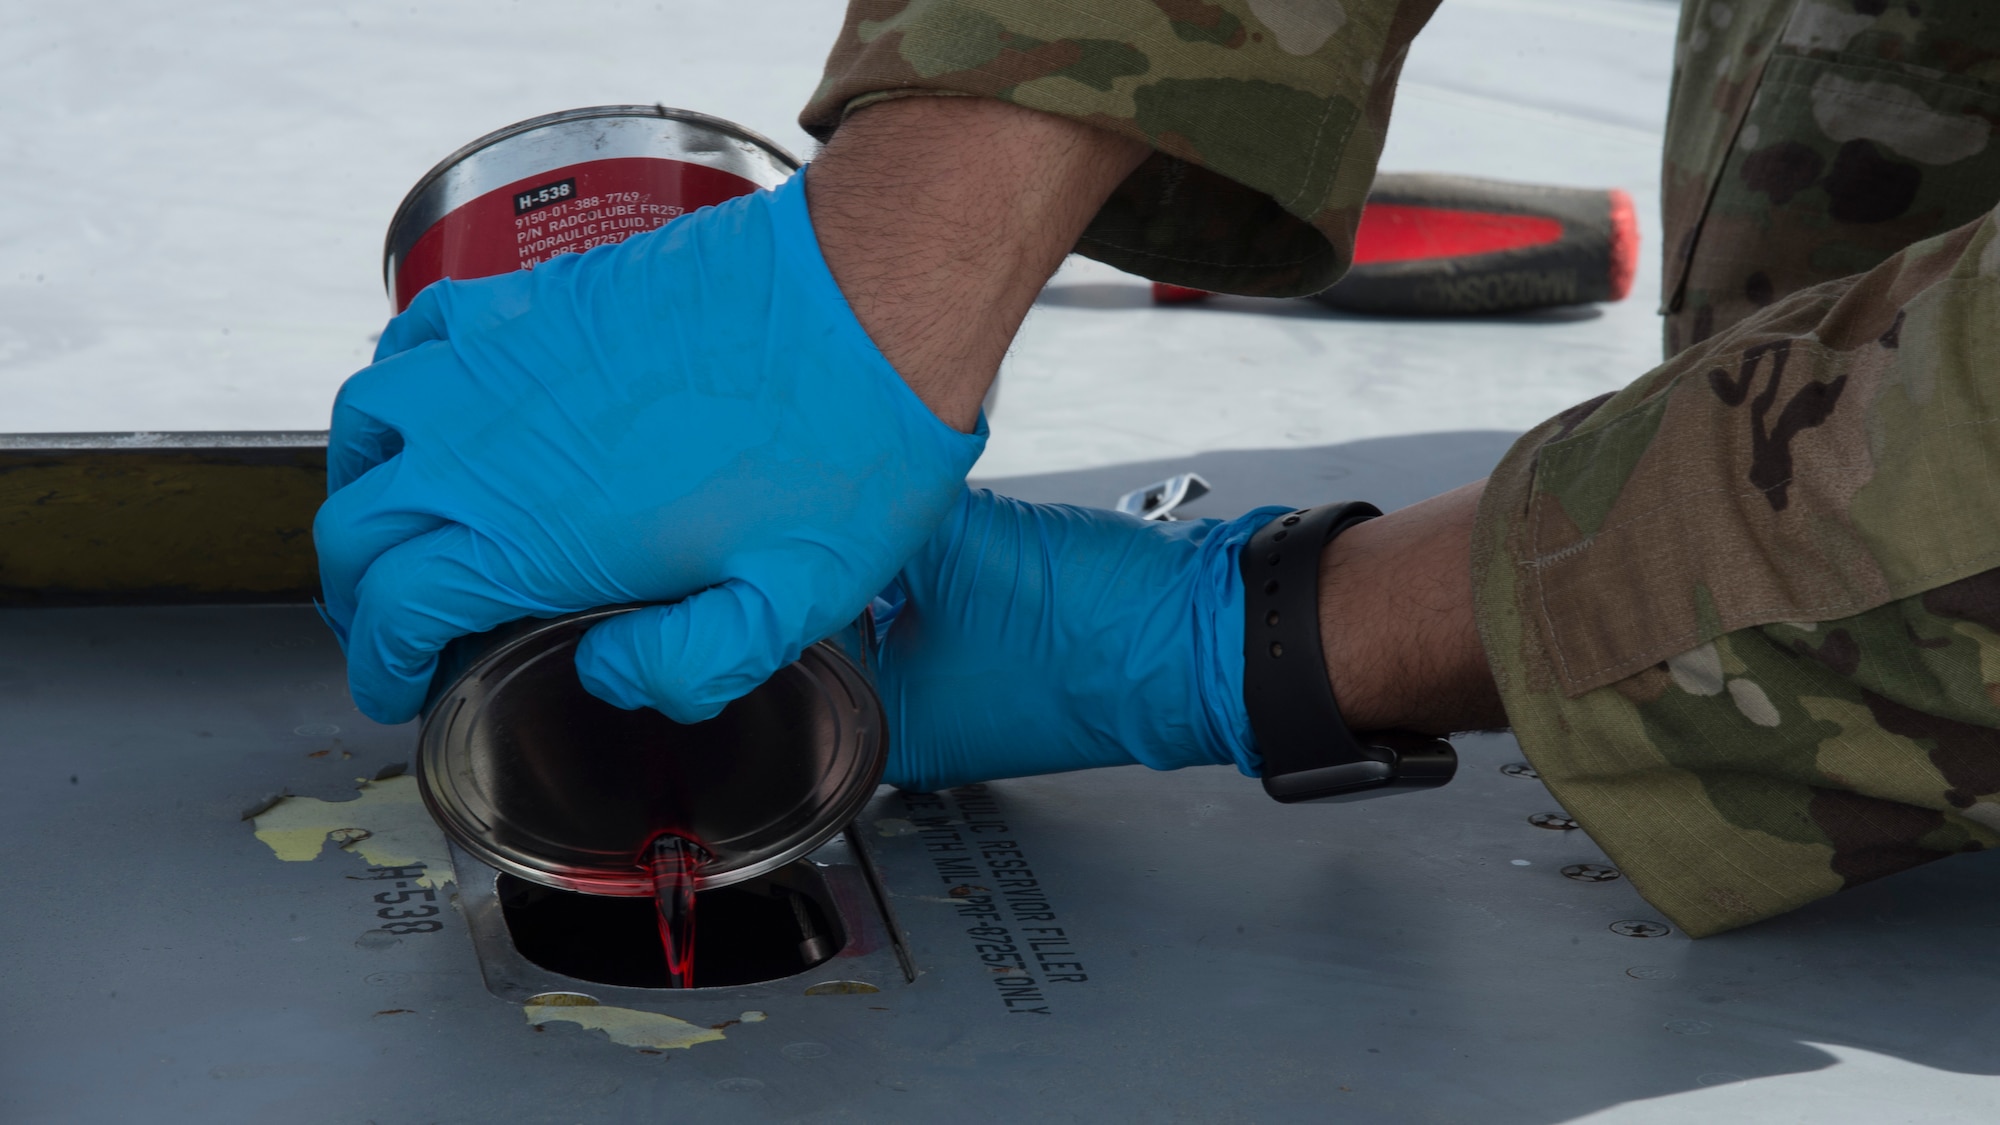 U.S. Air Force Airman 1st Class Trenton Carrere, a 6th Aircraft Maintenance Squadron (AMXS) crew chief, fills a hydraulic fluid reservoir on a KC-135 Stratotanker, Jan. 23, 2020, at MacDill Air Force Base, Fla. In 2019, the 6th AMXS supported over 5,000 flight hours and 965 sorties.